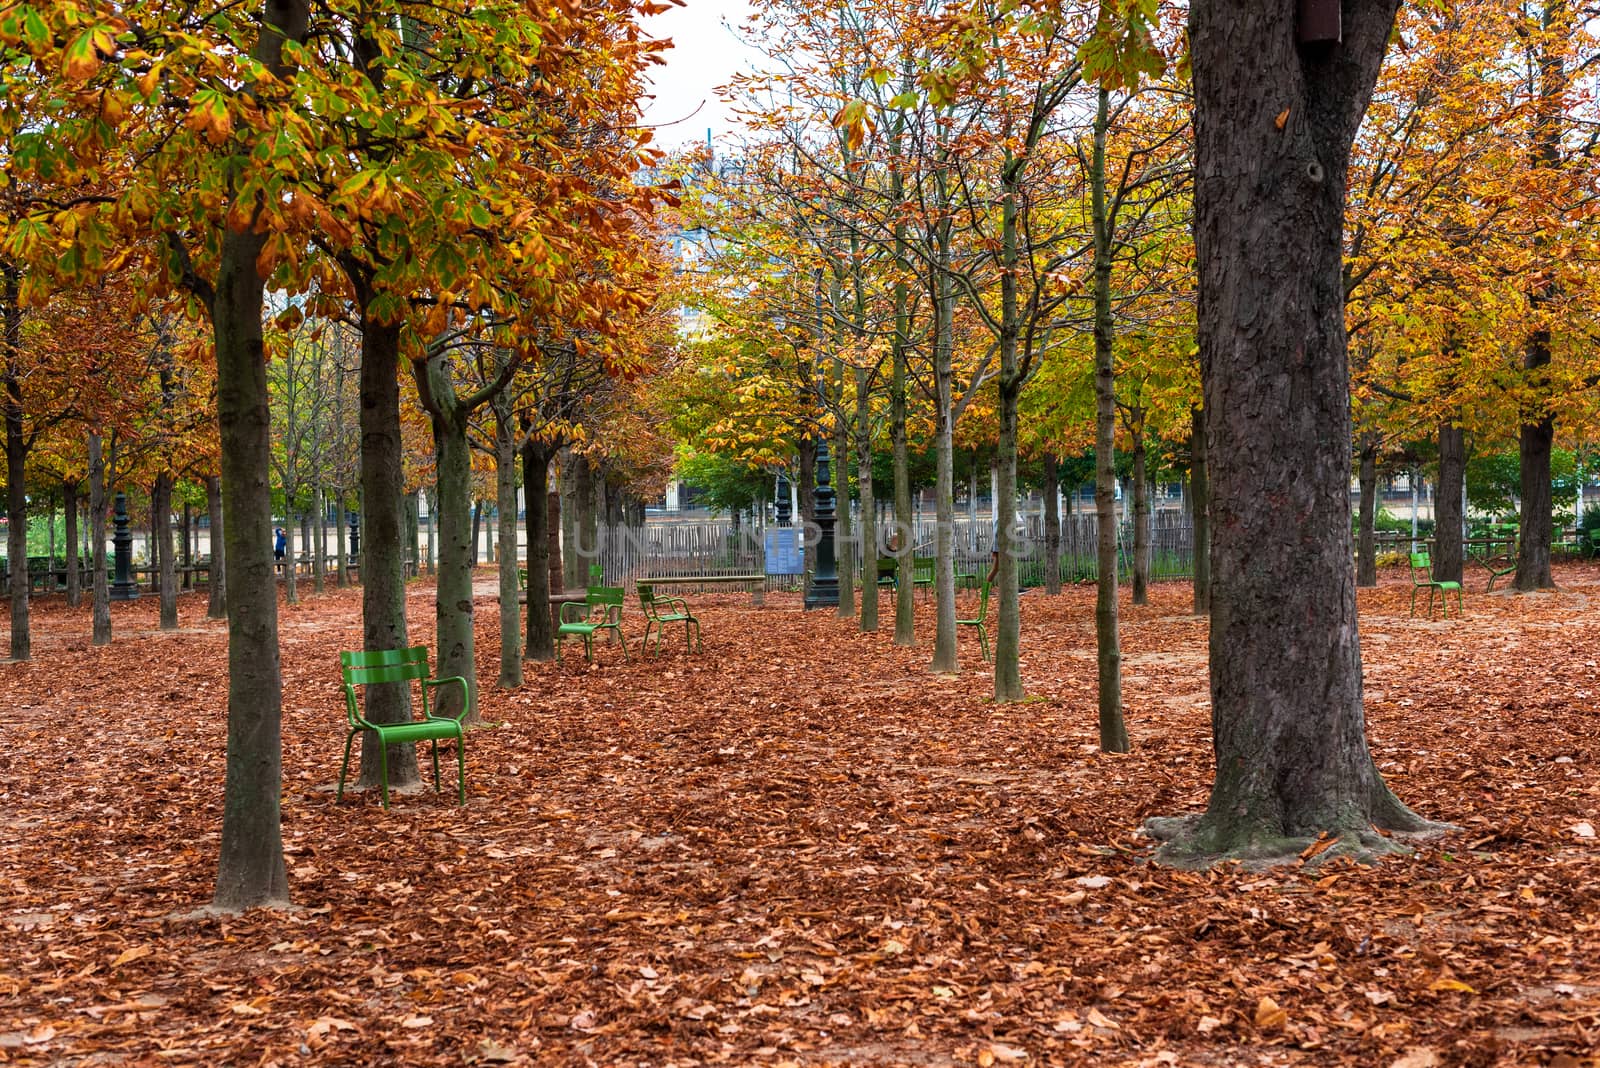 The grounds of the Tuilery Gardens are covered with fallen leaves as the trees turn colors in Autumn.